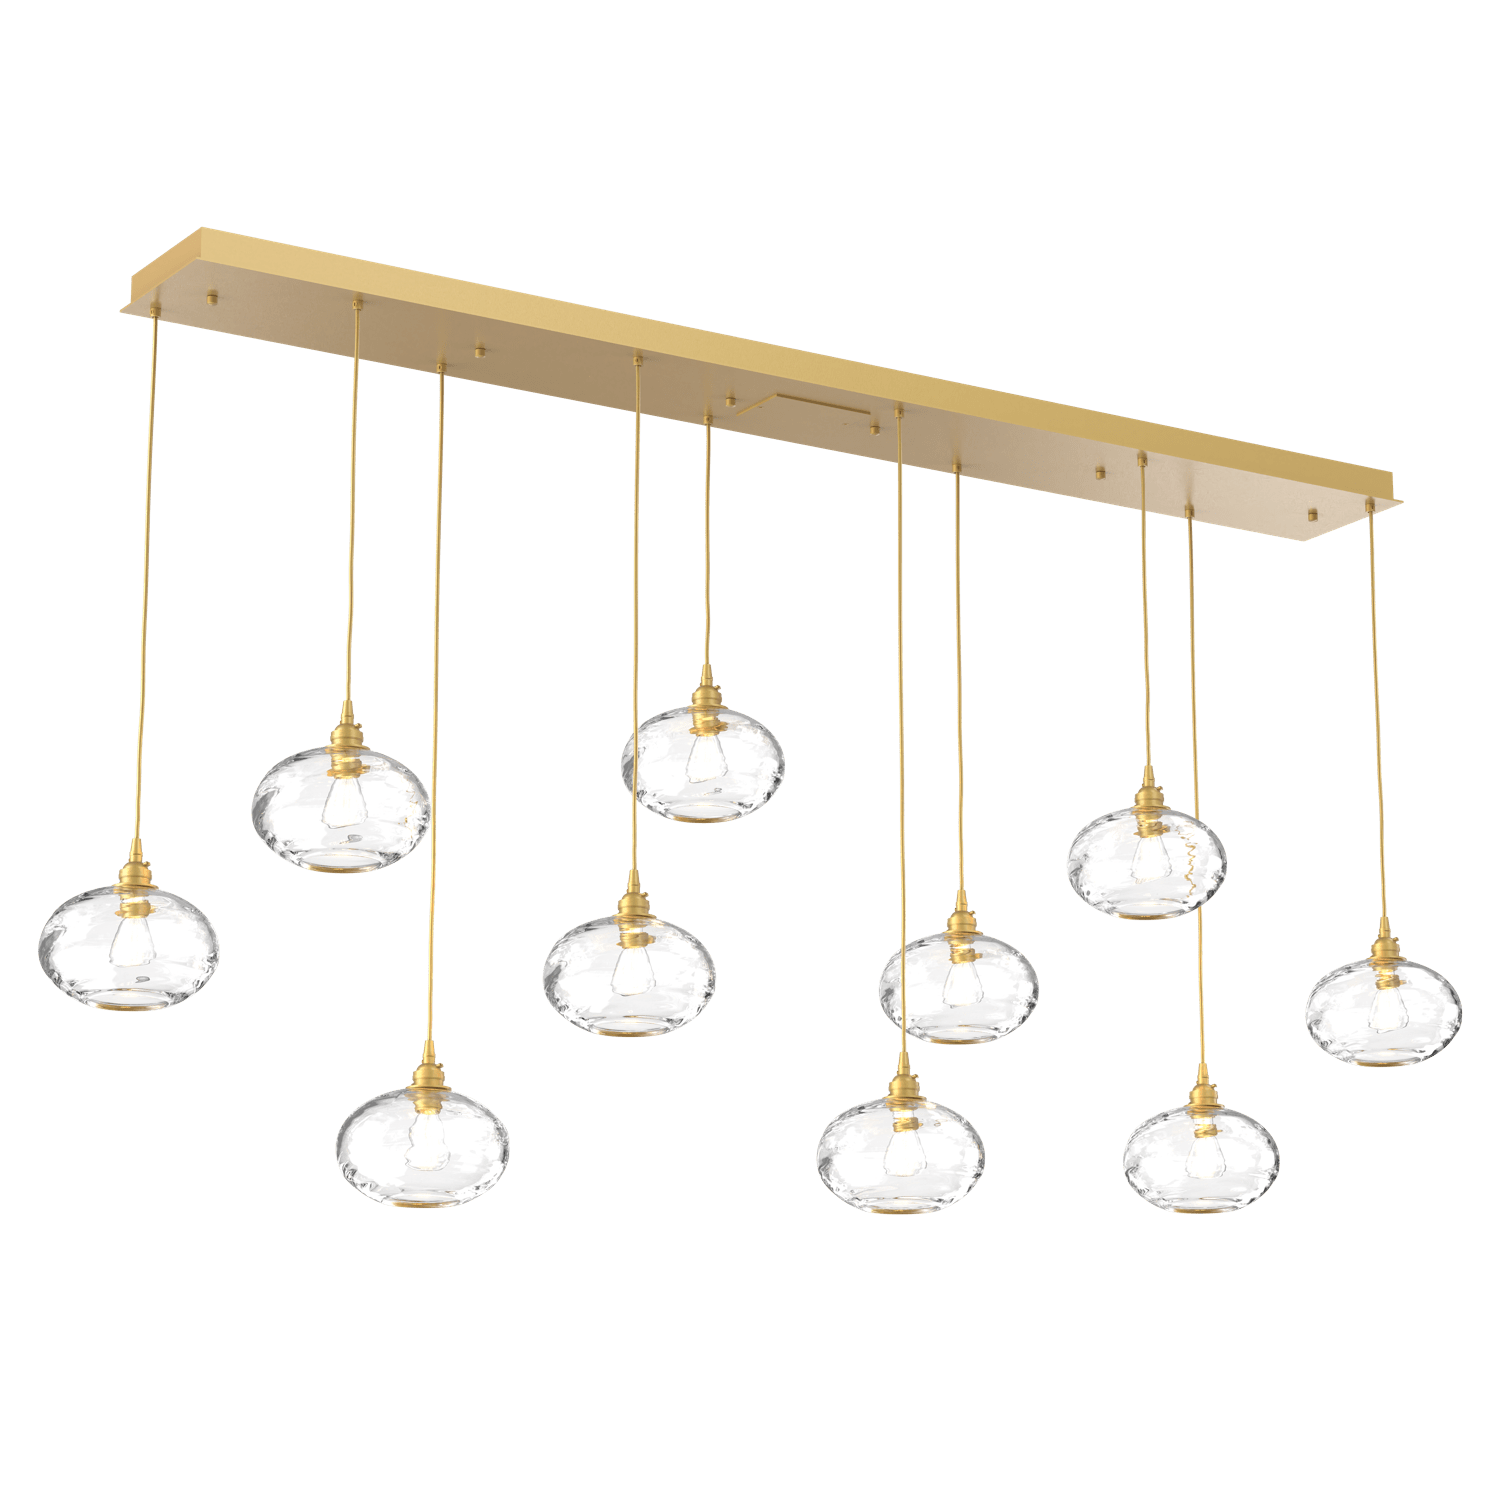 PLB0036-10-GB-OC-Hammerton-Studio-Optic-Blown-Glass-Coppa-10-light-linear-pendant-chandelier-with-gilded-brass-finish-and-optic-clear-blown-glass-shades-and-incandescent-lamping